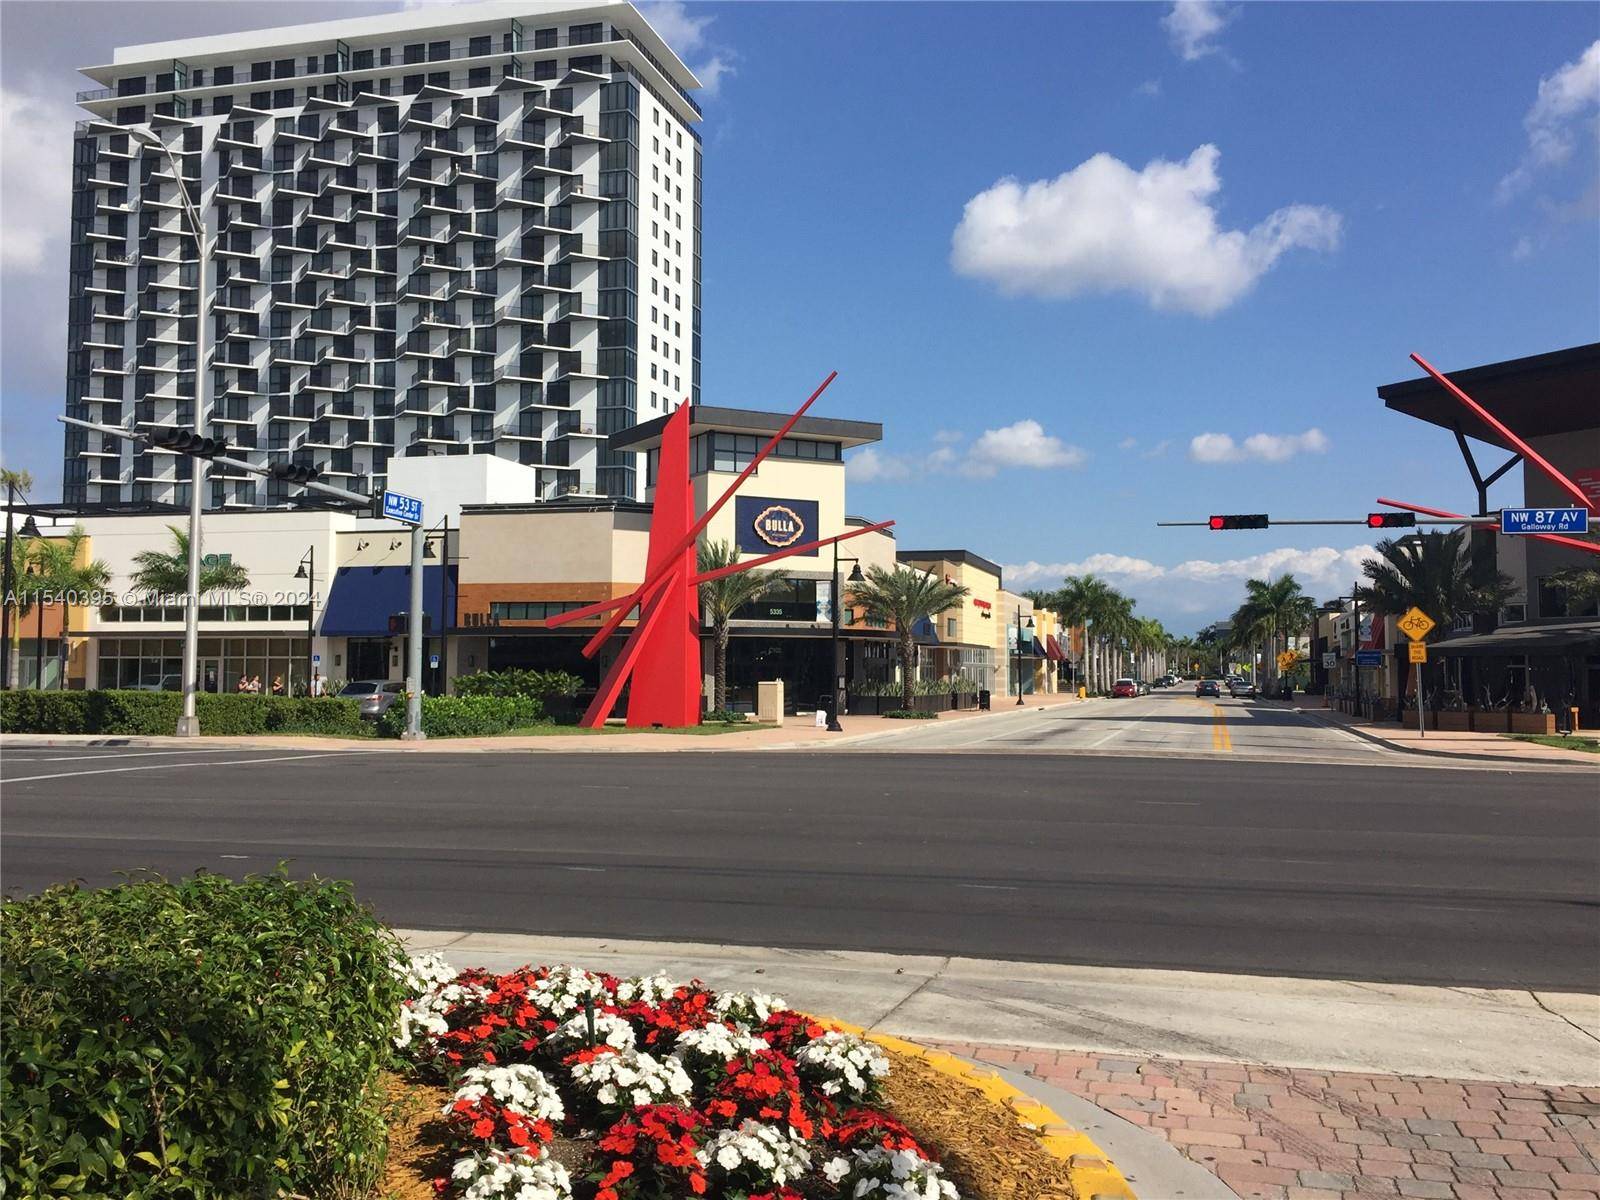 Fully furnished, 1 bedroom, 1 bathroom unit in Downtown Doral.